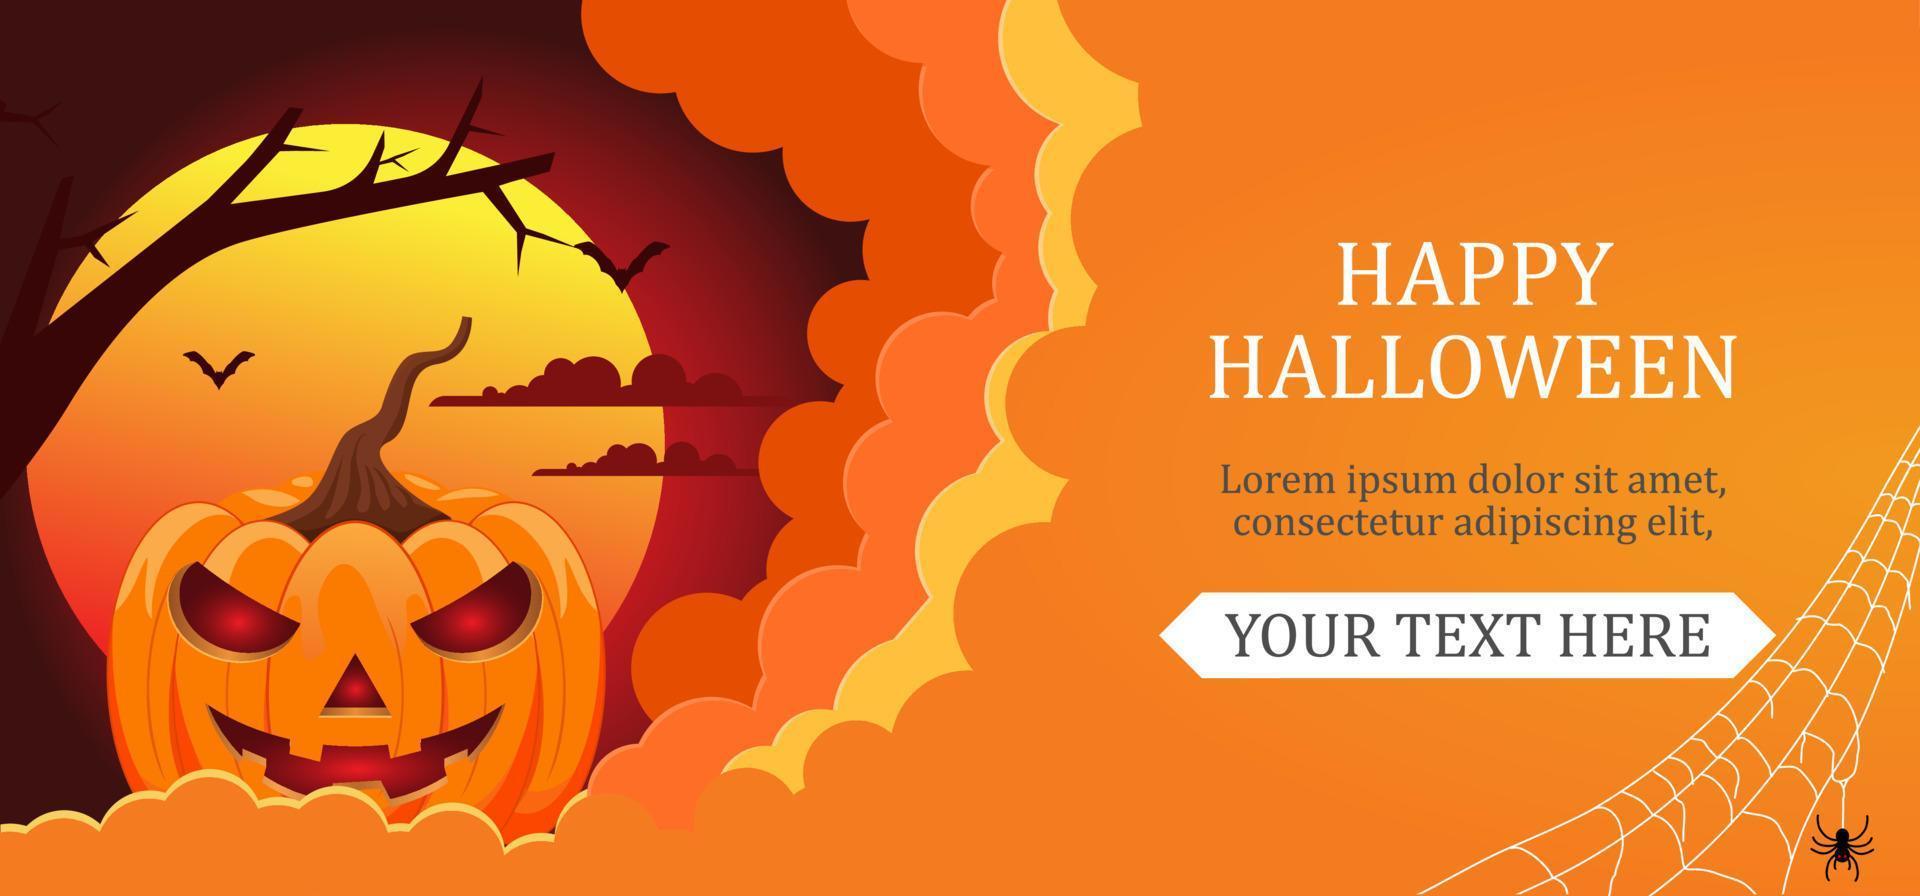 halloween card design in paper cut style vector